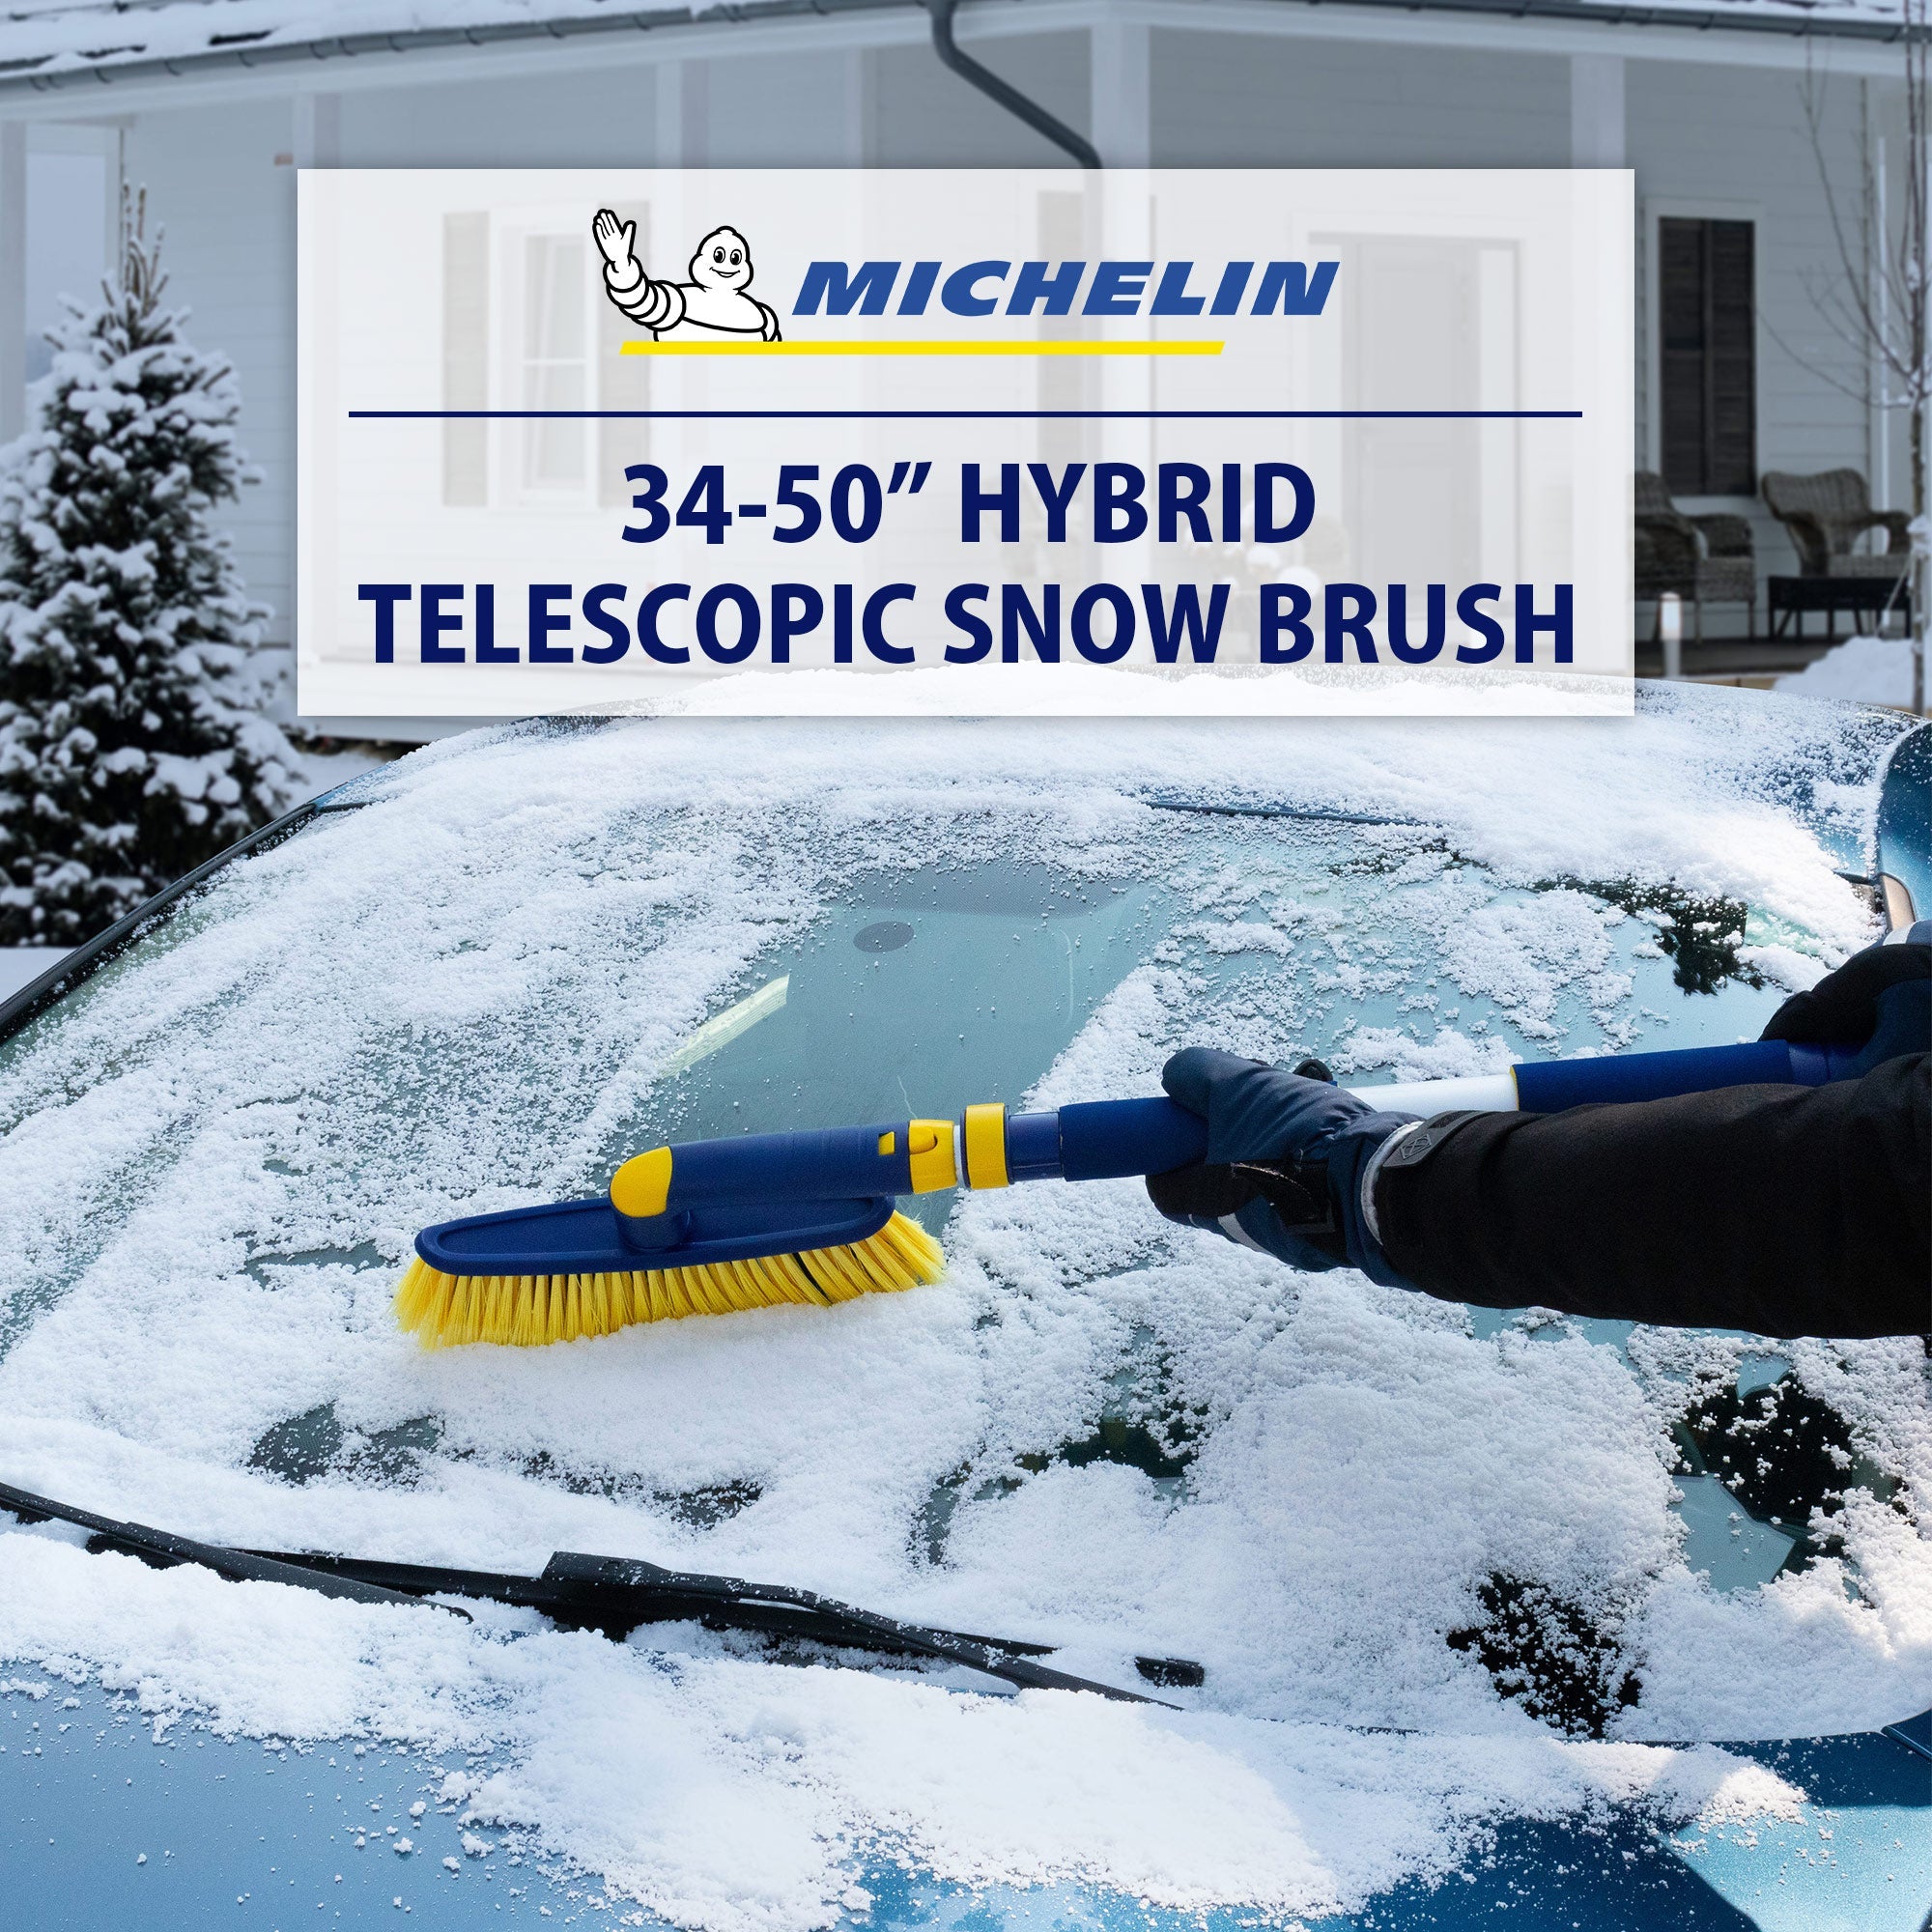 Lifestyle image of a gloved hand using the snow brush, extended, to remove snow from the windshield of a dark coloured car. Transparent white overlay above shows the Michelin logo above text reading "34-50" hybrid telescopic snow brush"